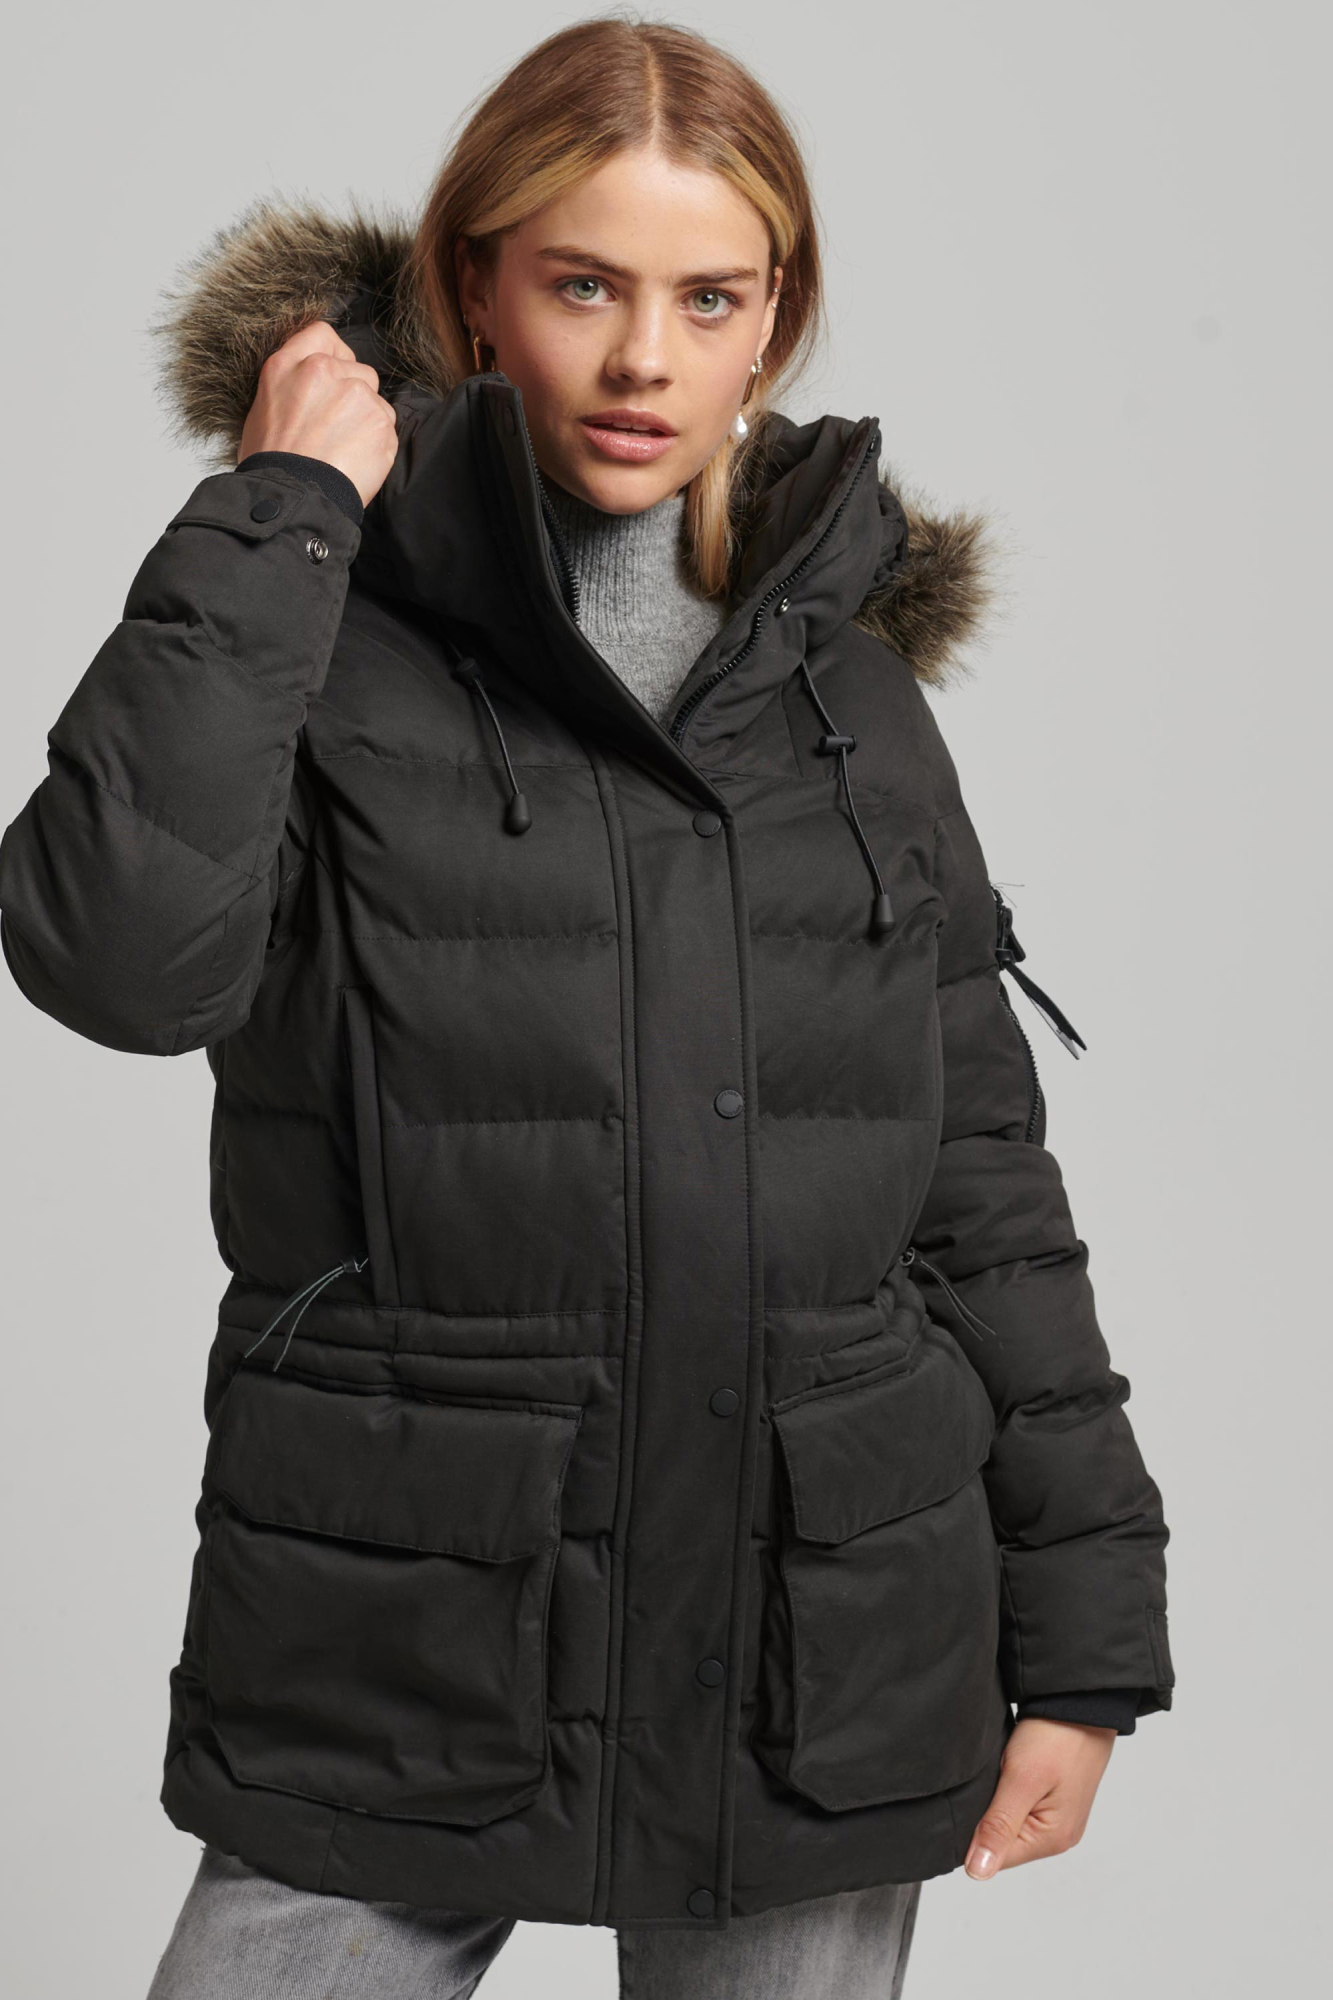 Superdry Womens Microfibre Expedition Parka Black - Size: 12